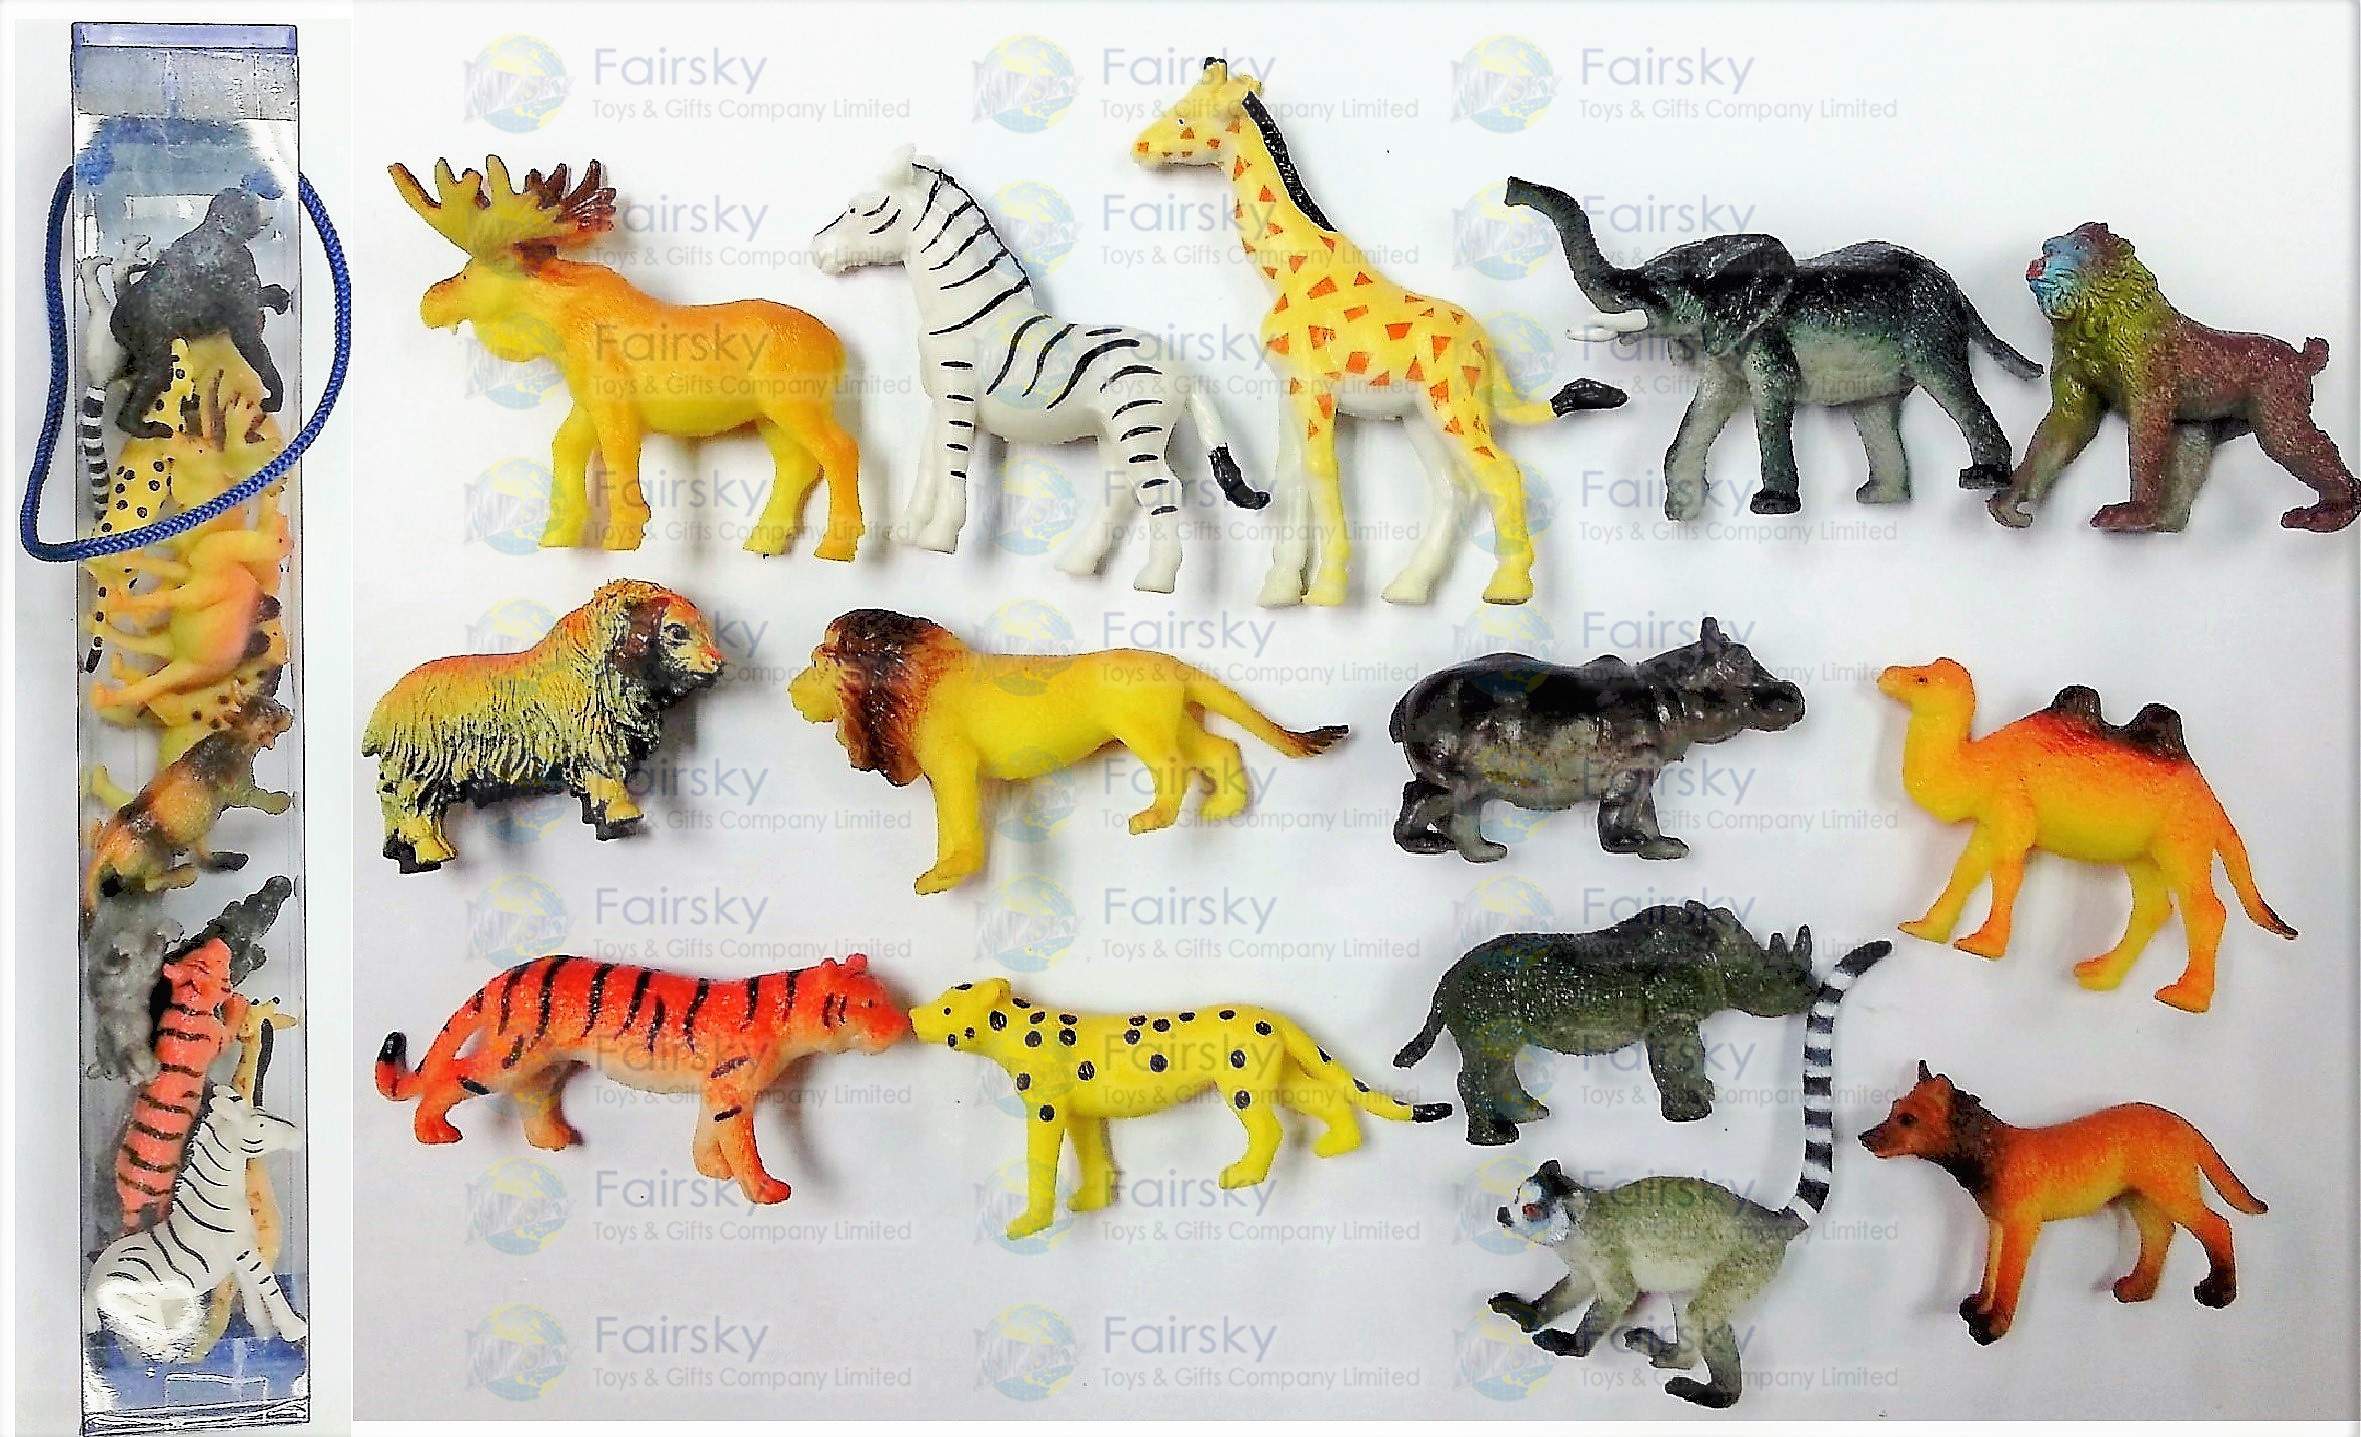 Set of 14pcs Wild Animals in Square Tub – Fairsky Toys and Gifts Company  Limited